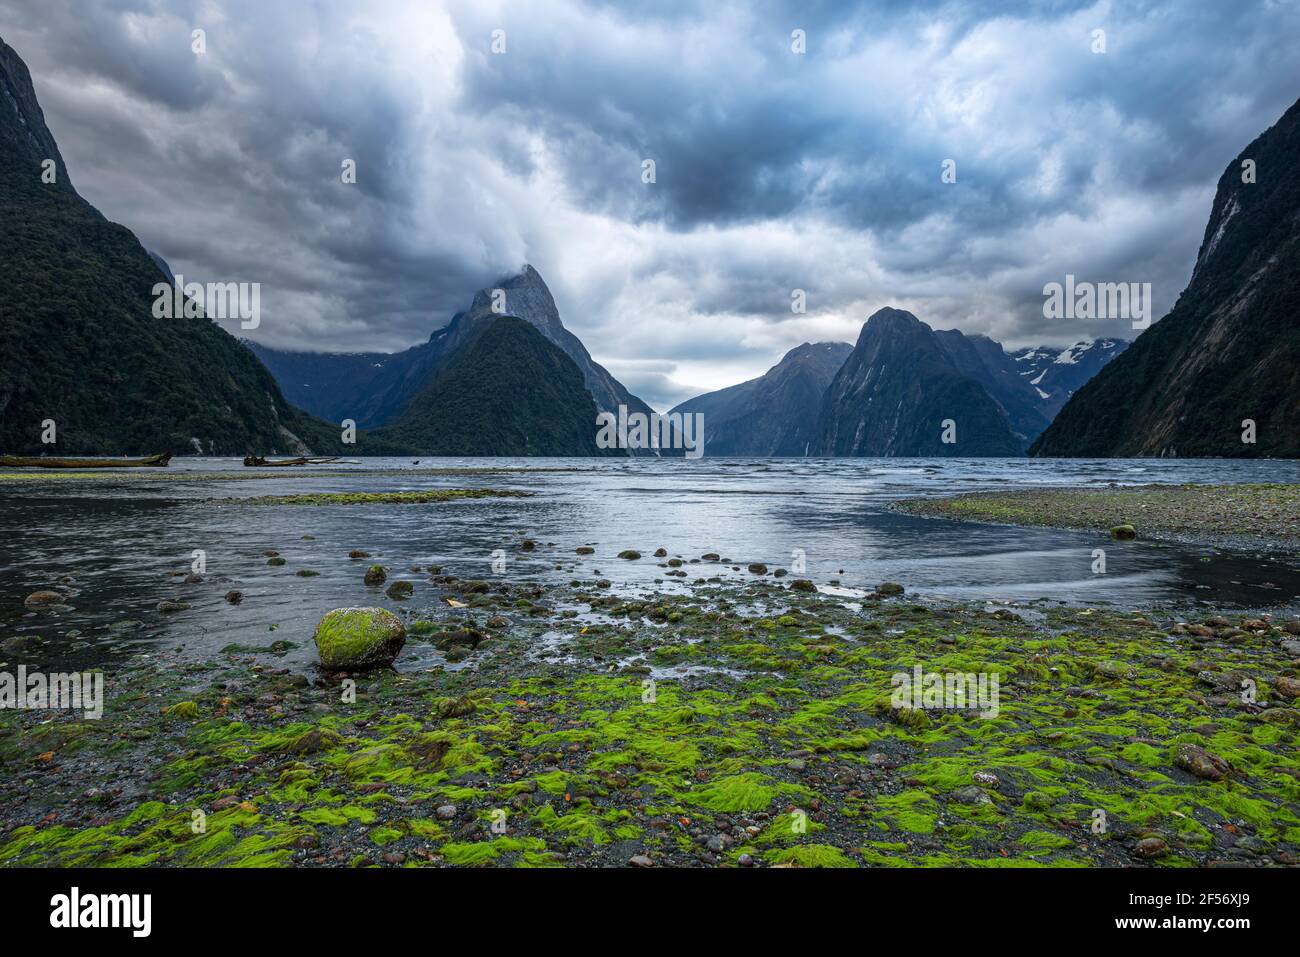 New Zealand, Fiordland, Storm clouds over scenic coastline of Milford Sound Stock Photo